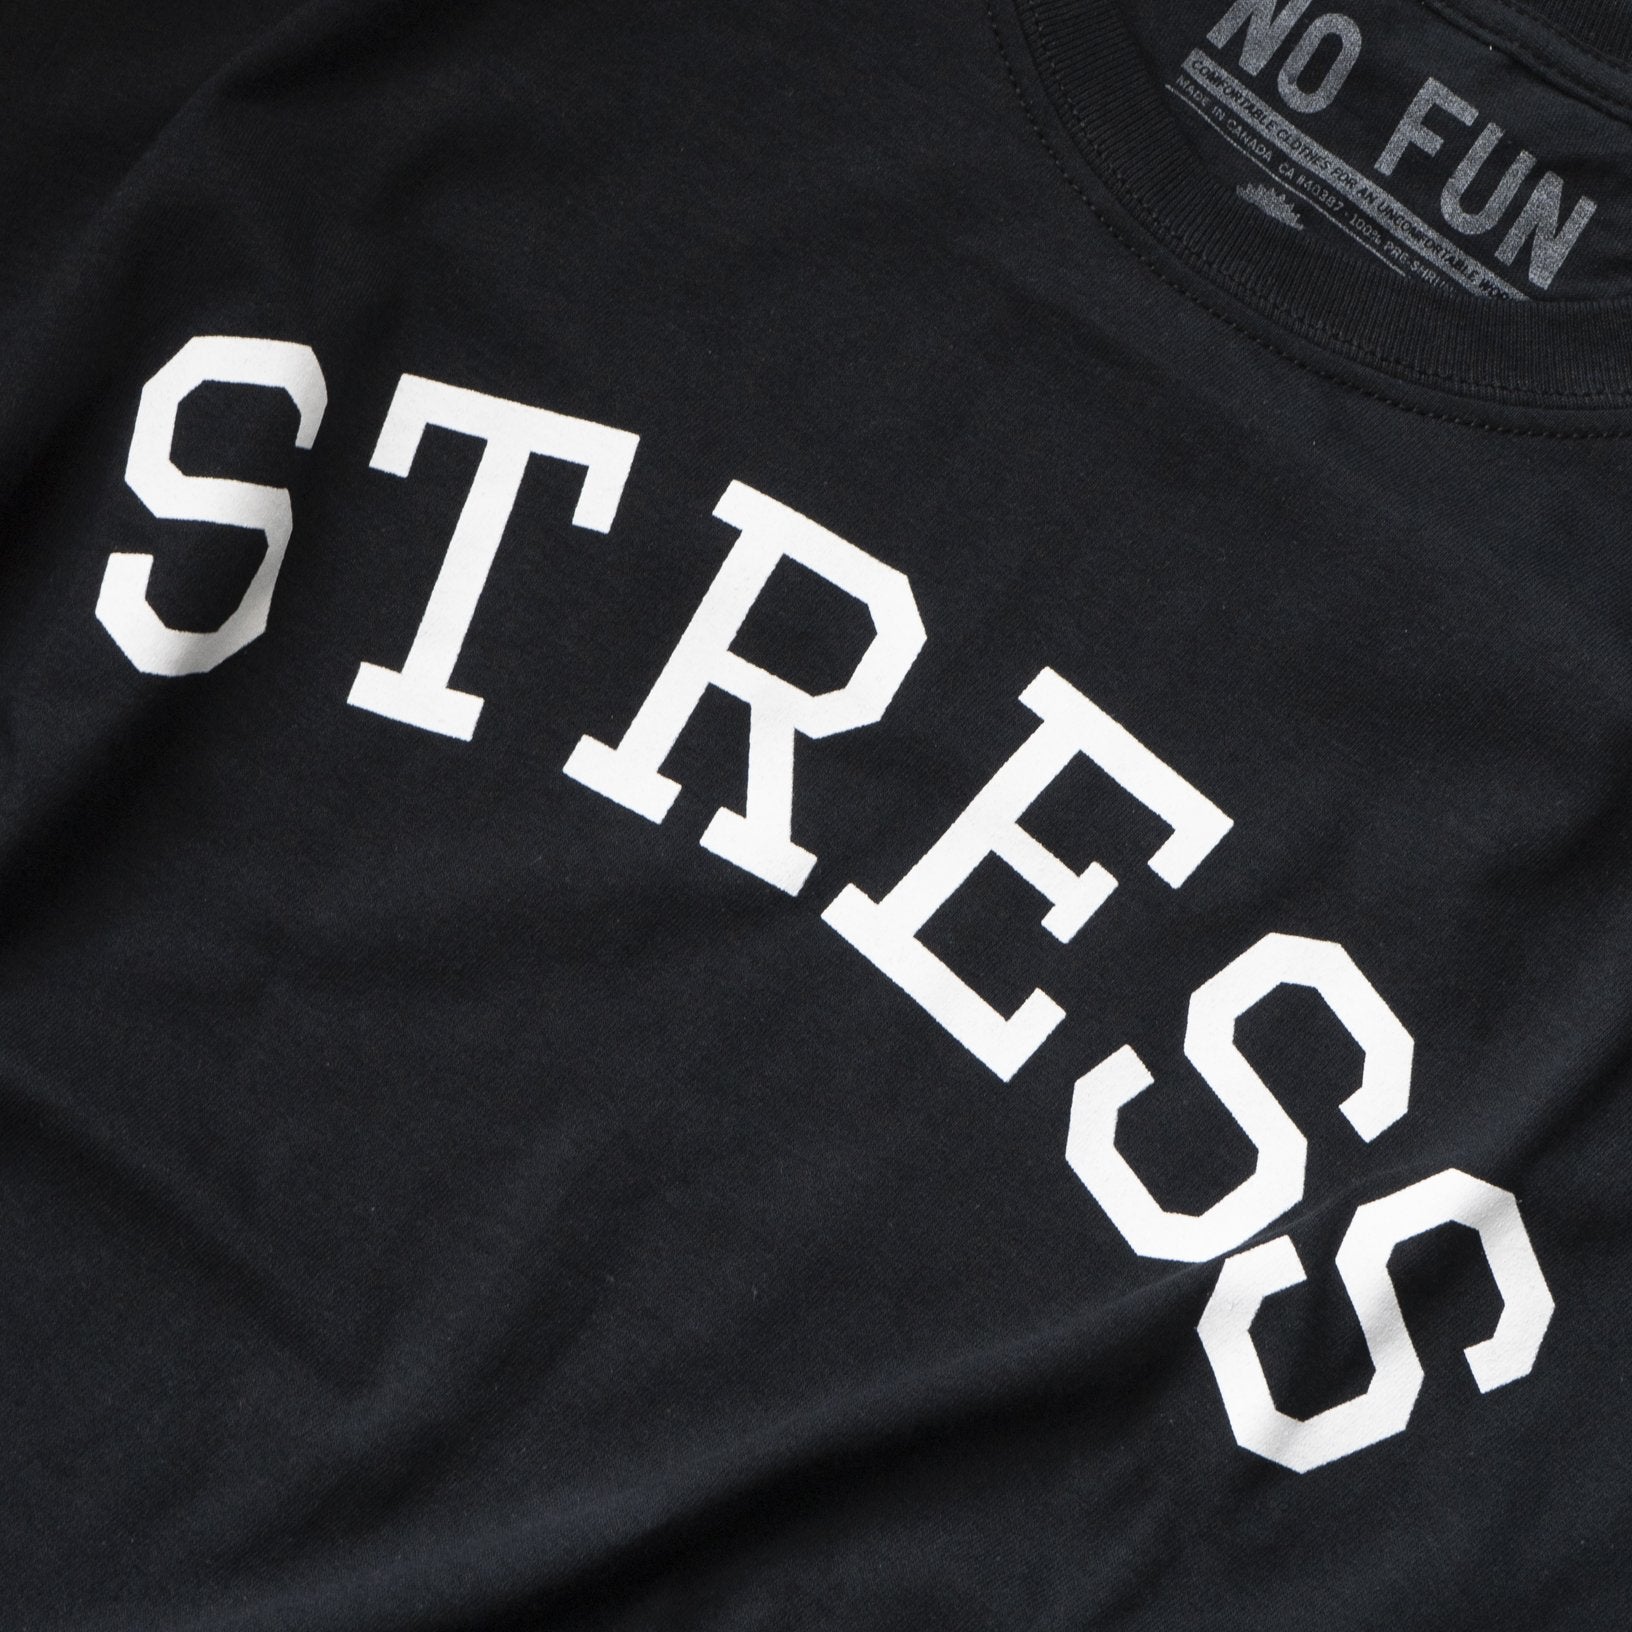 Detail photo of the original NO FUN® "STRESS" t-shirt. Shirt is black and features large white collegiate style text that reads "STRESS" across the front in an arc shape.